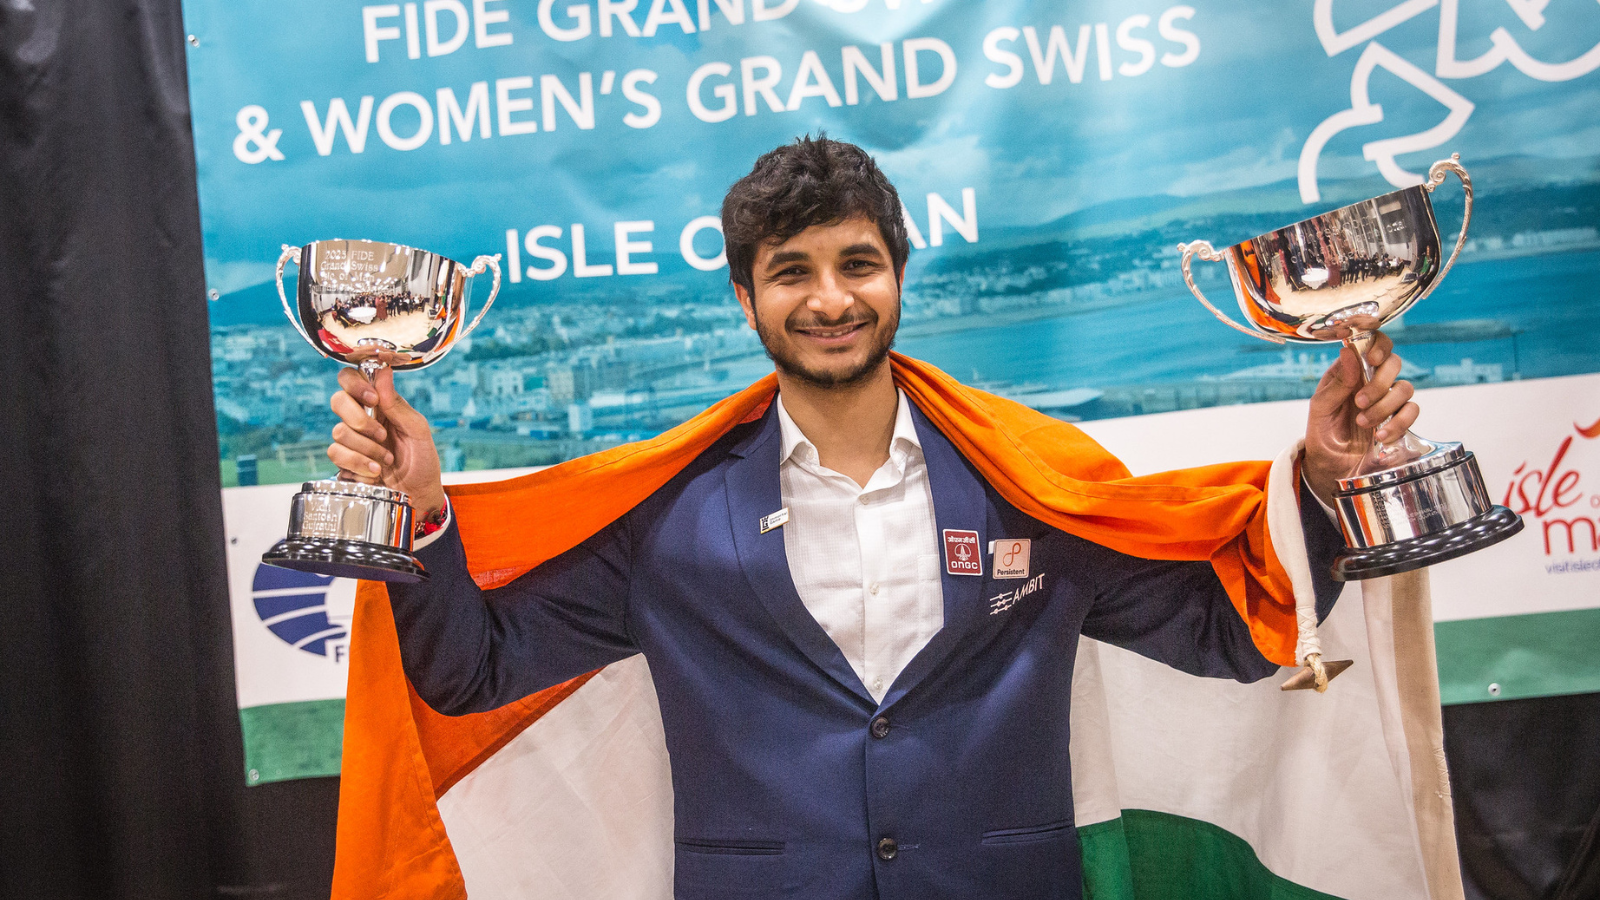 Indian GM Vidit Gujrathi scores 2 wins, women players stutter in